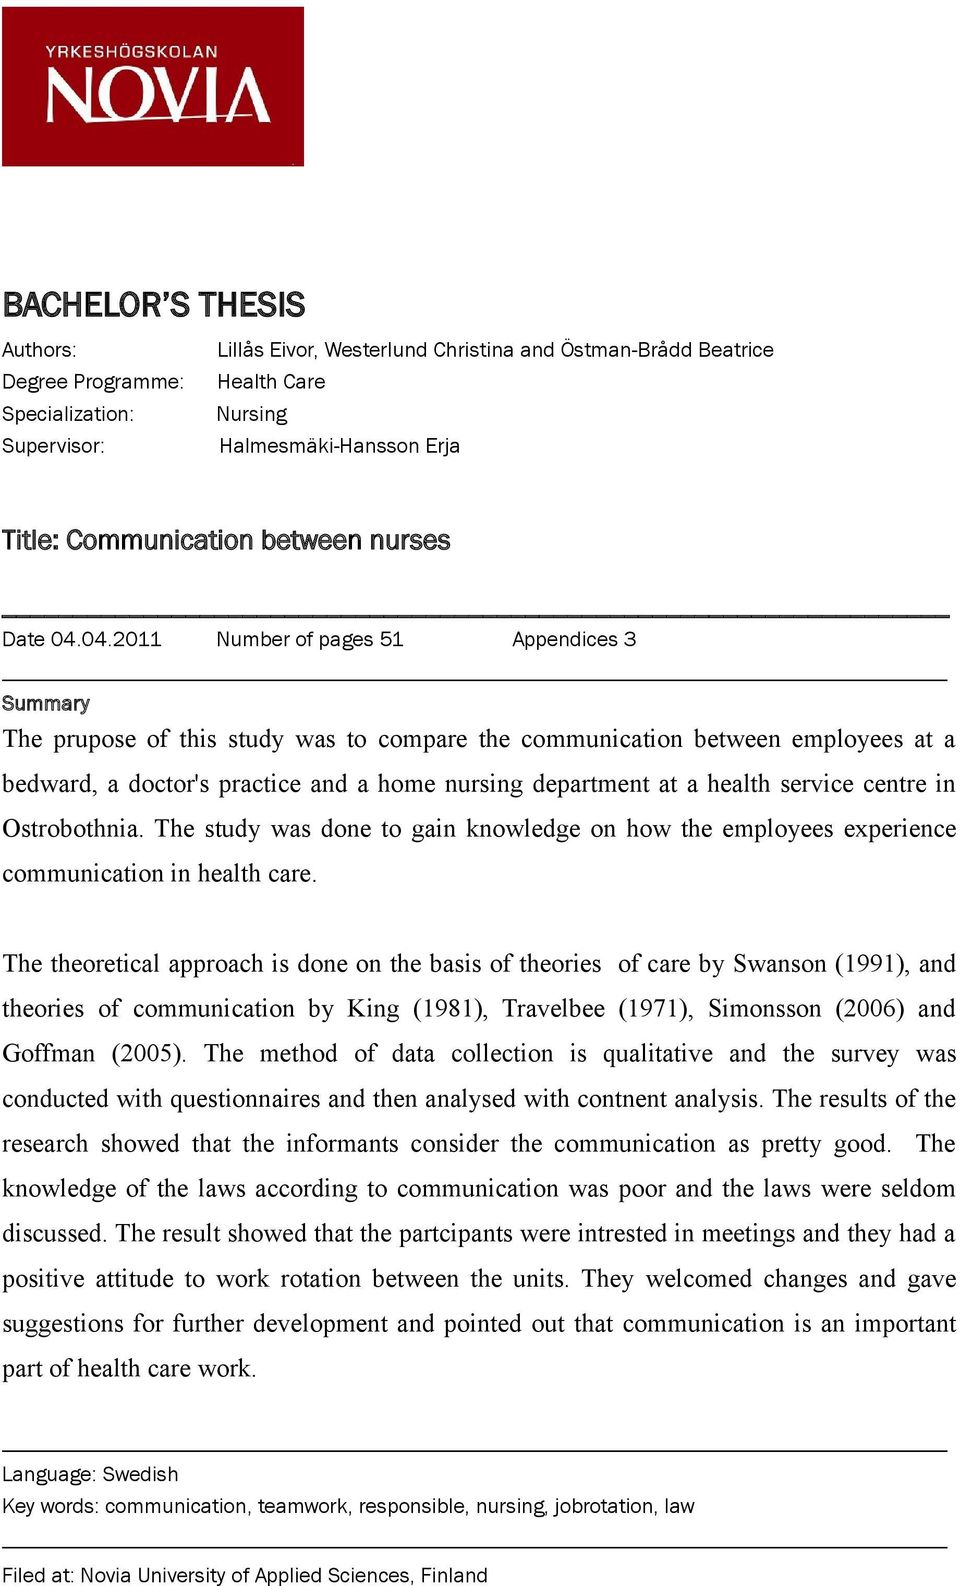 04.2011 Number of pages 51 Appendices 3 Summary The prupose of this study was to compare the communication between employees at a bedward, a doctor's practice and a home nursing department at a